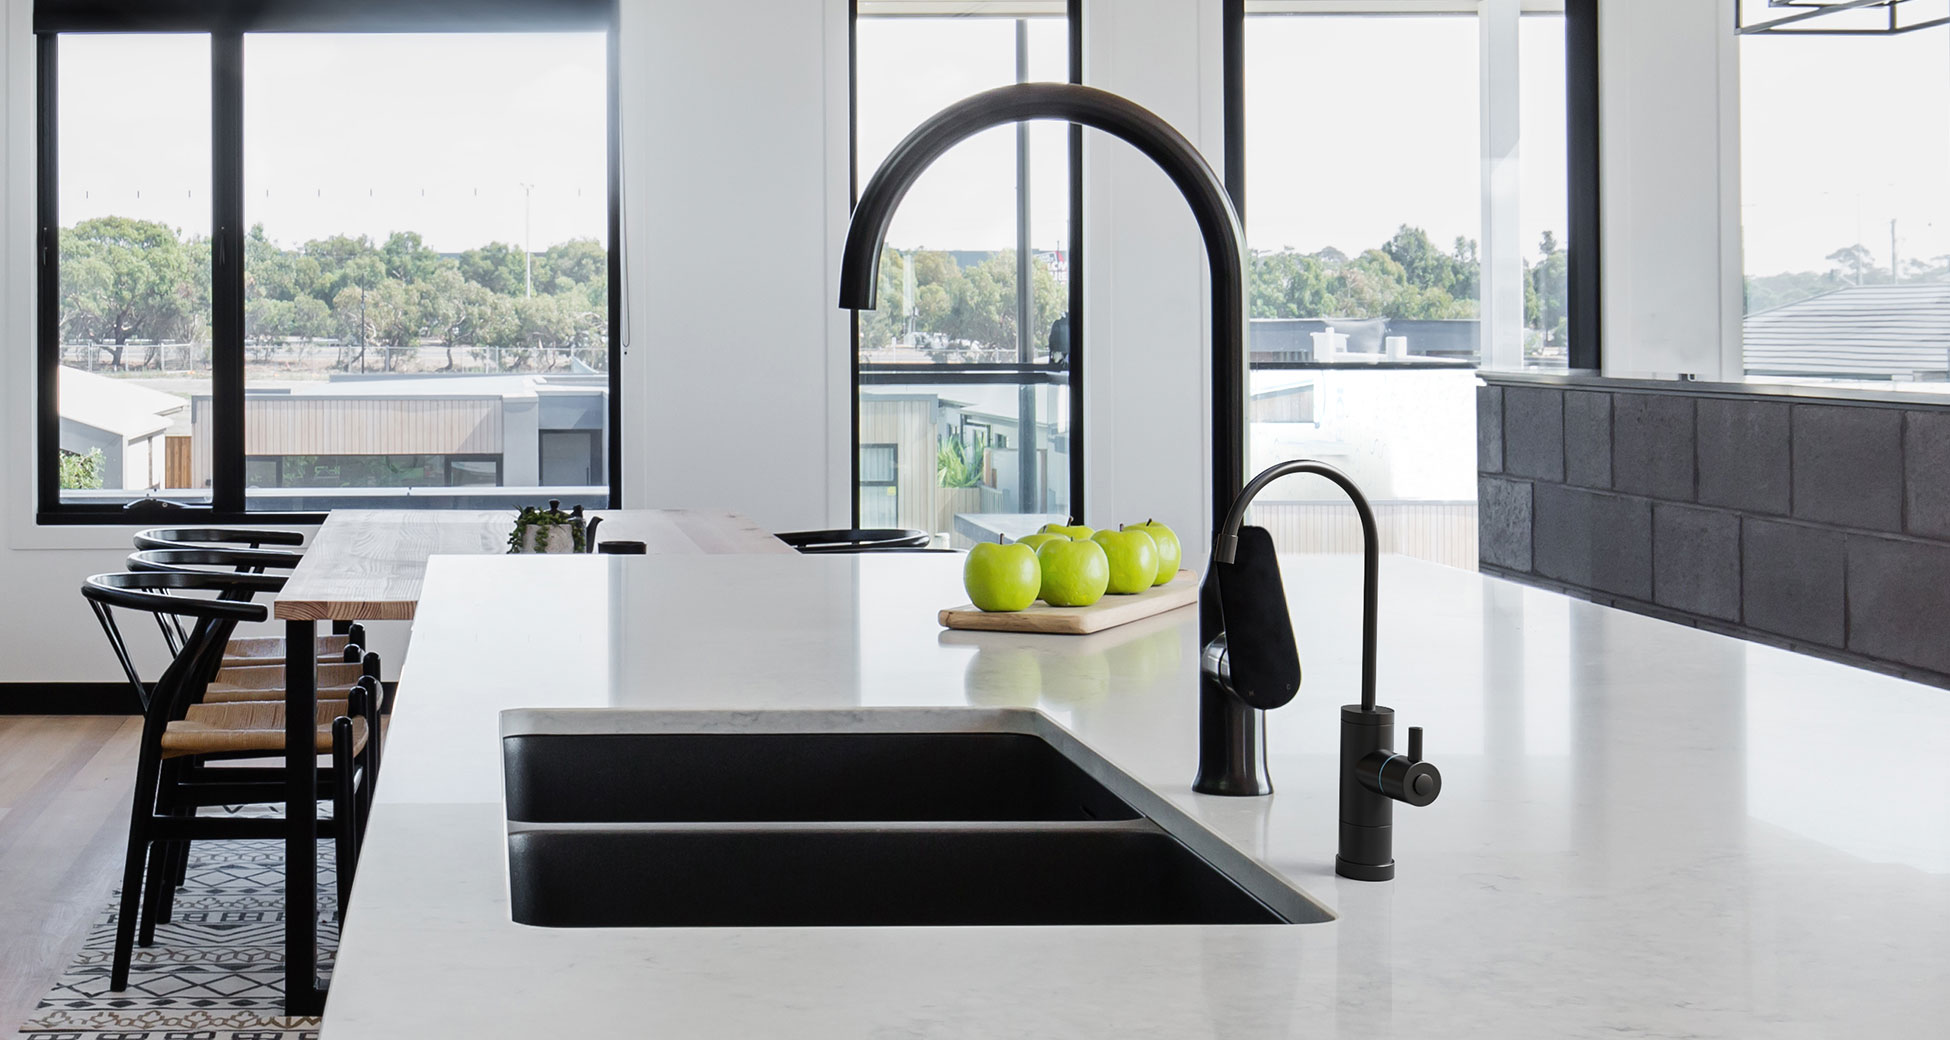 drinking water faucet in modern kitchen